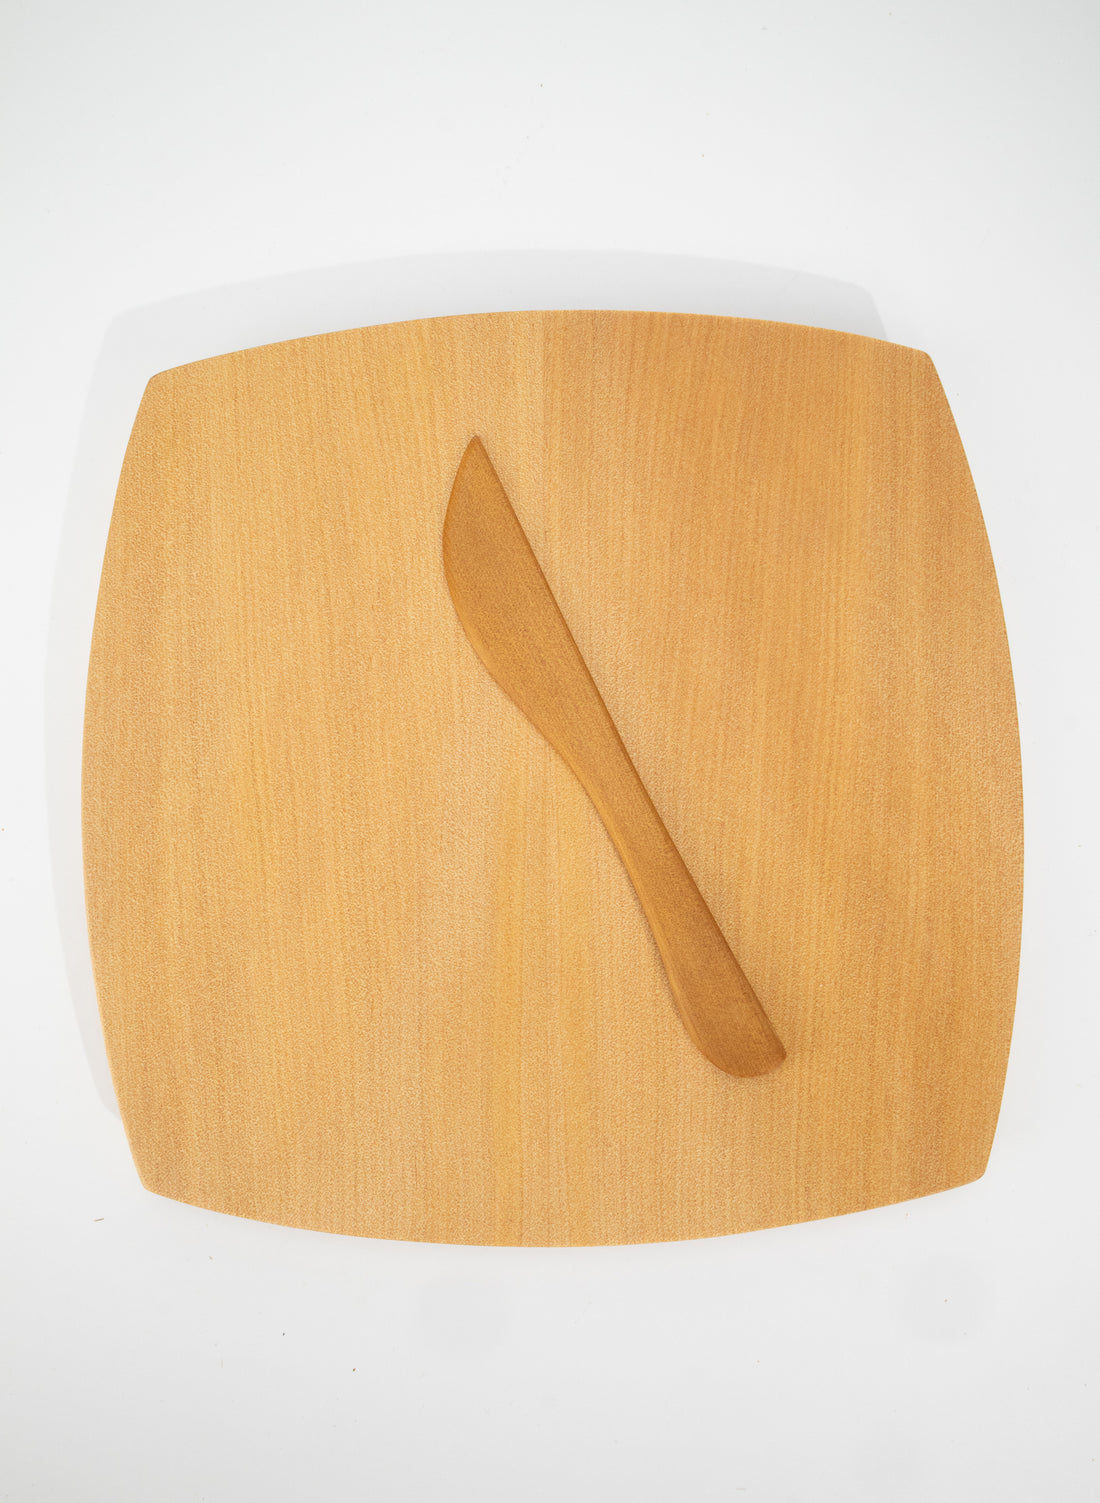 Kauri Board With Knife - Large